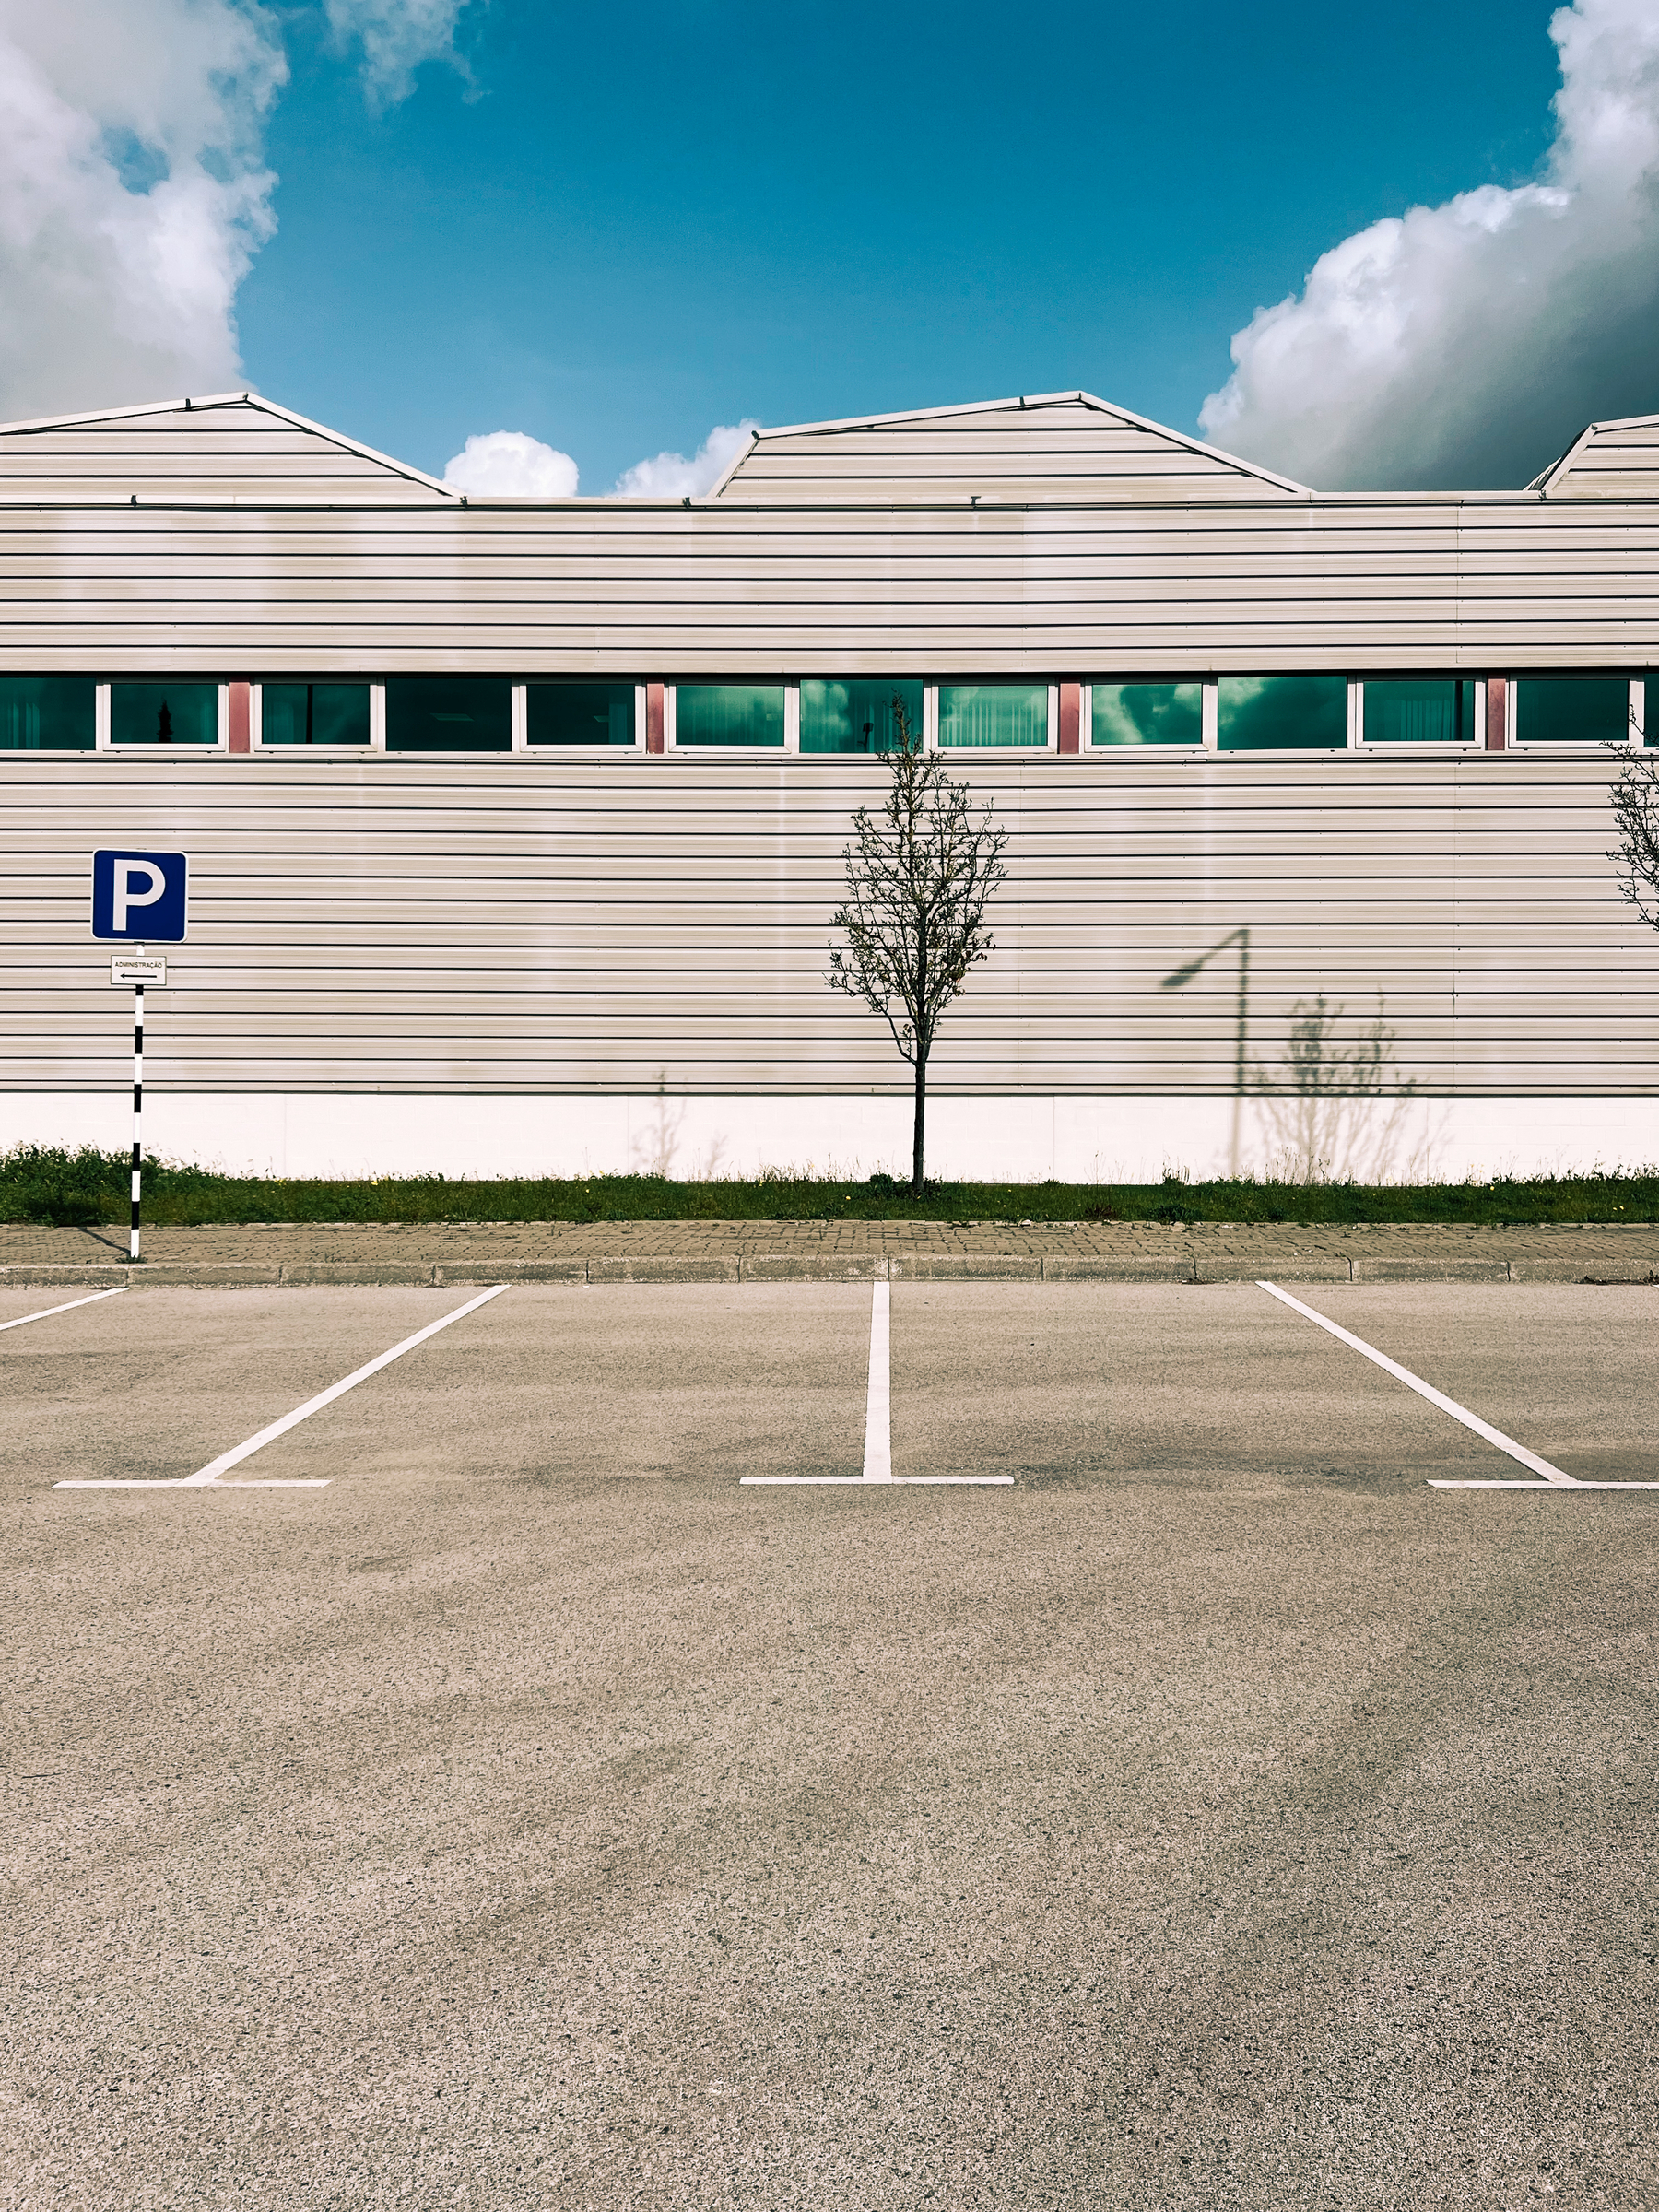 An empty parking lot with marked parking spaces in front of a modern building with horizontal siding. A solitary tree stands to the left, a parking sign with a blue &lsquo;P&rsquo; on the right, under a partly cloudy sky.